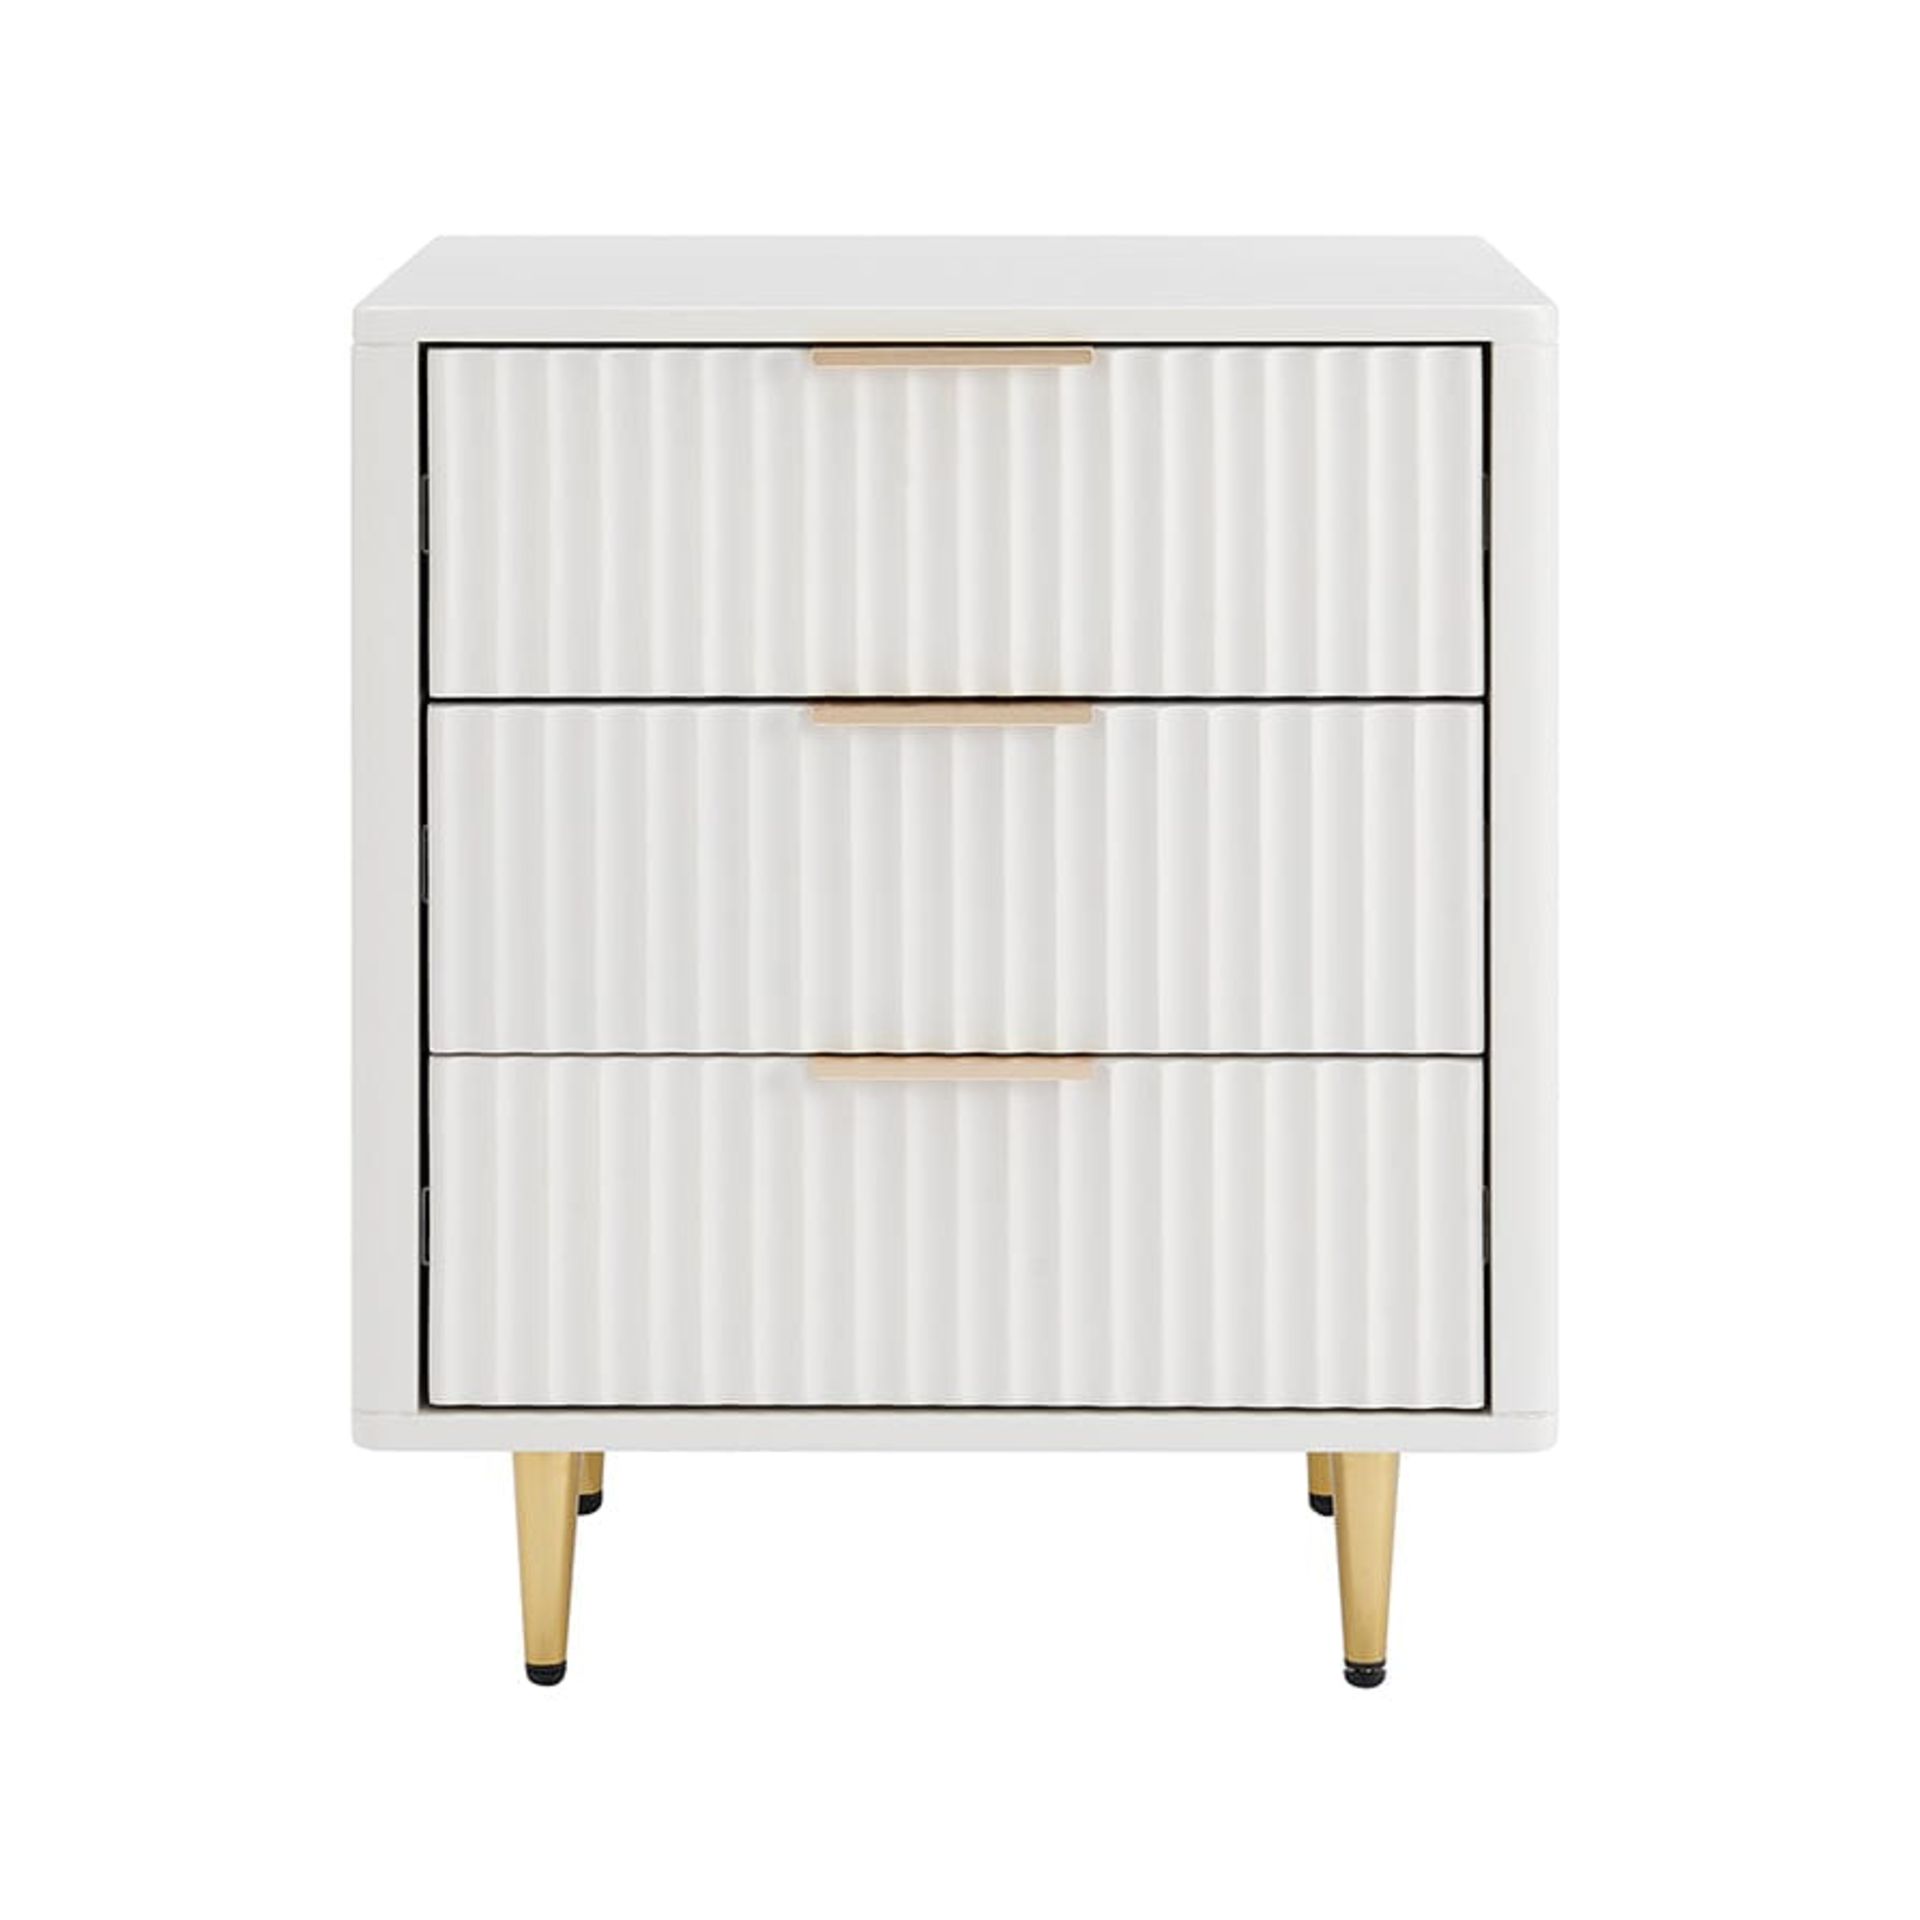 Dusk Gracie 3 Drawer Bedside Table - White/Gold RRP 159About the Product(s)TXBSWG - Gracie 3